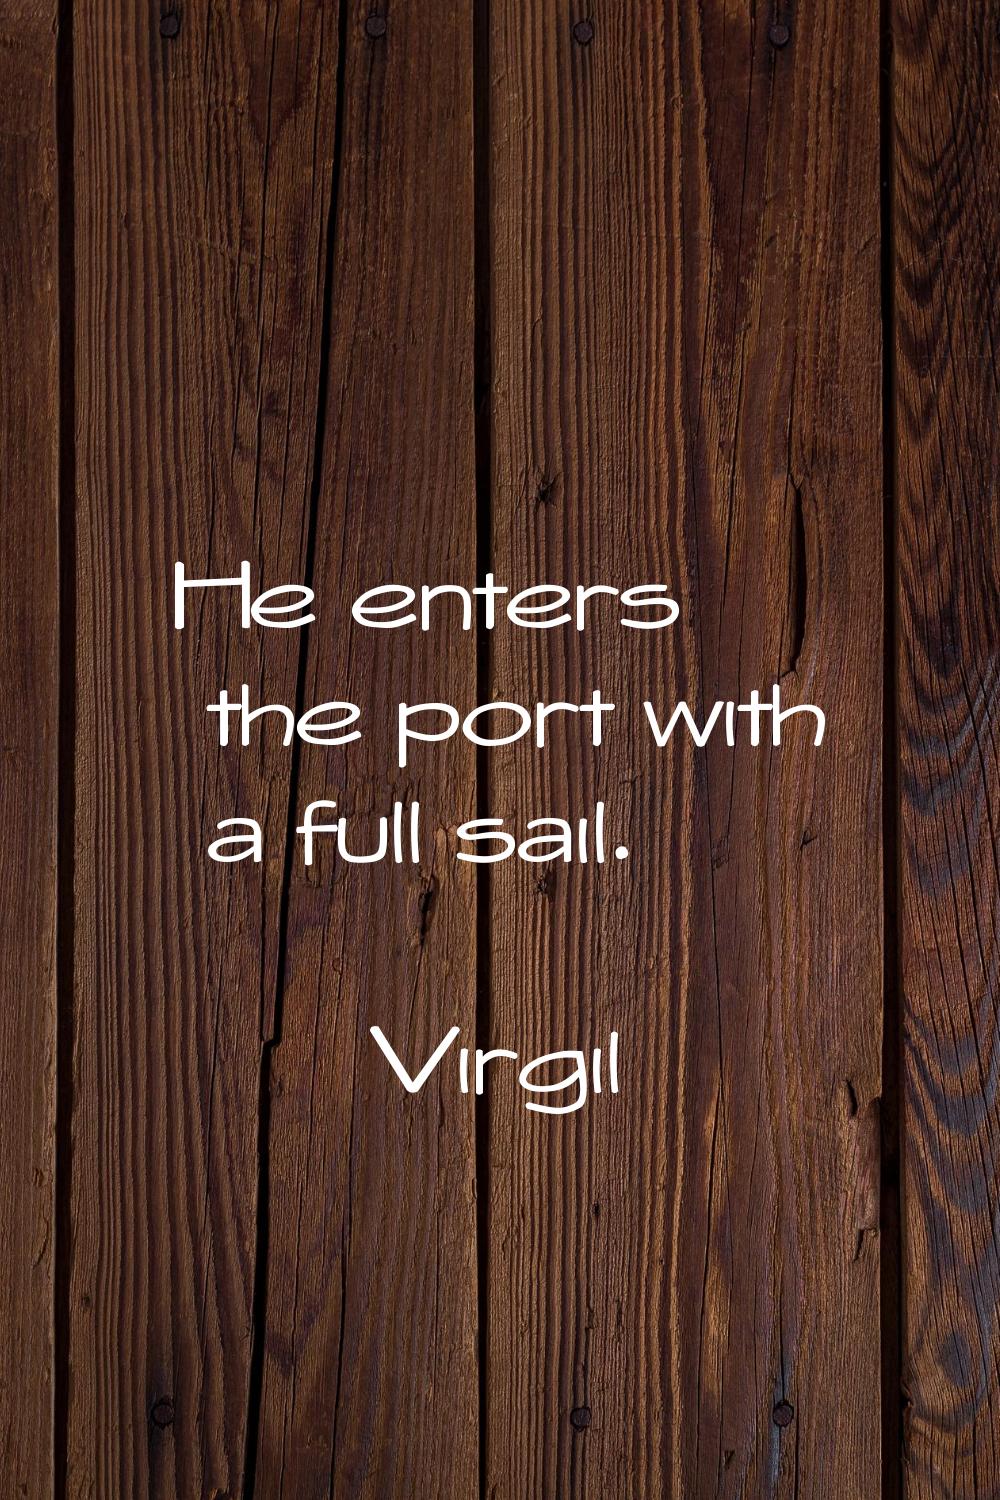 He enters the port with a full sail.